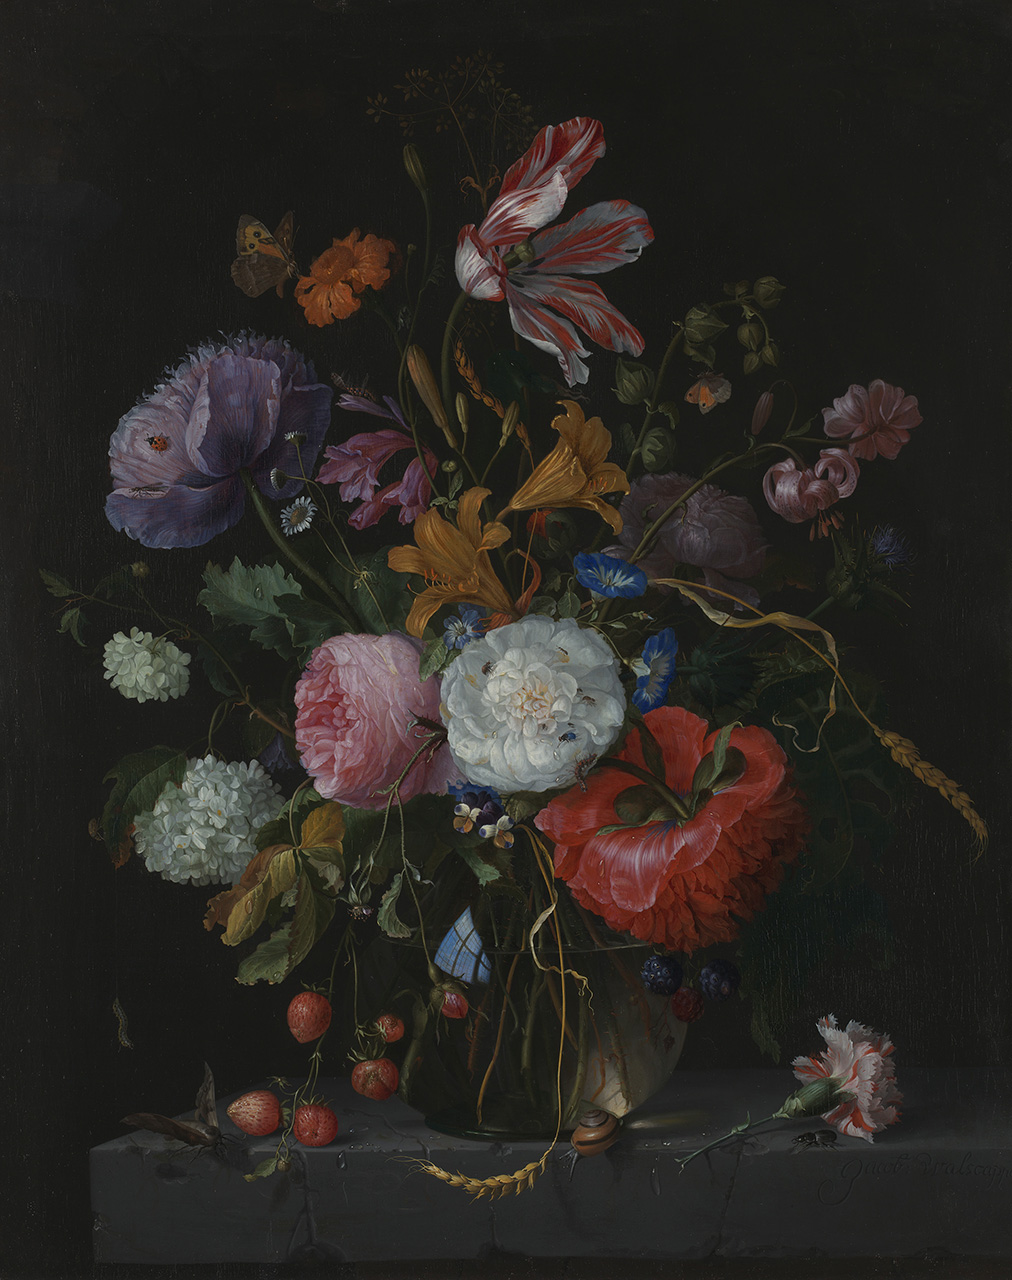 An arrangement of purple, red, pink, orange, blue and white flowers against a dark background.